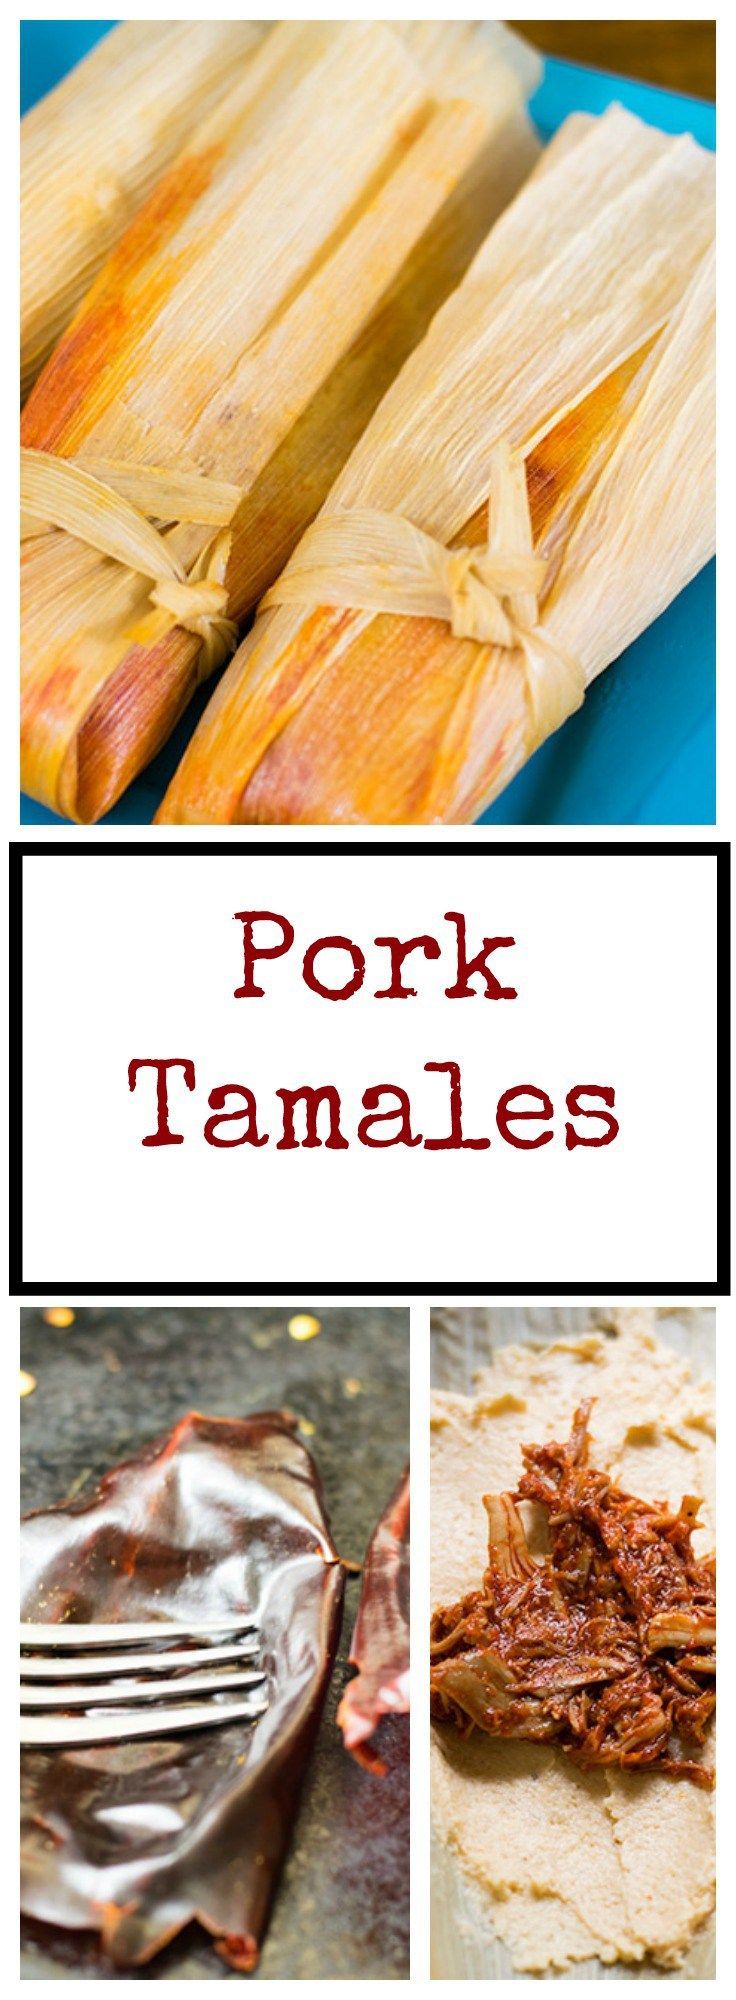 The most delicious pork tamales you will ever make! Broken down into steps with photos to make it easier.